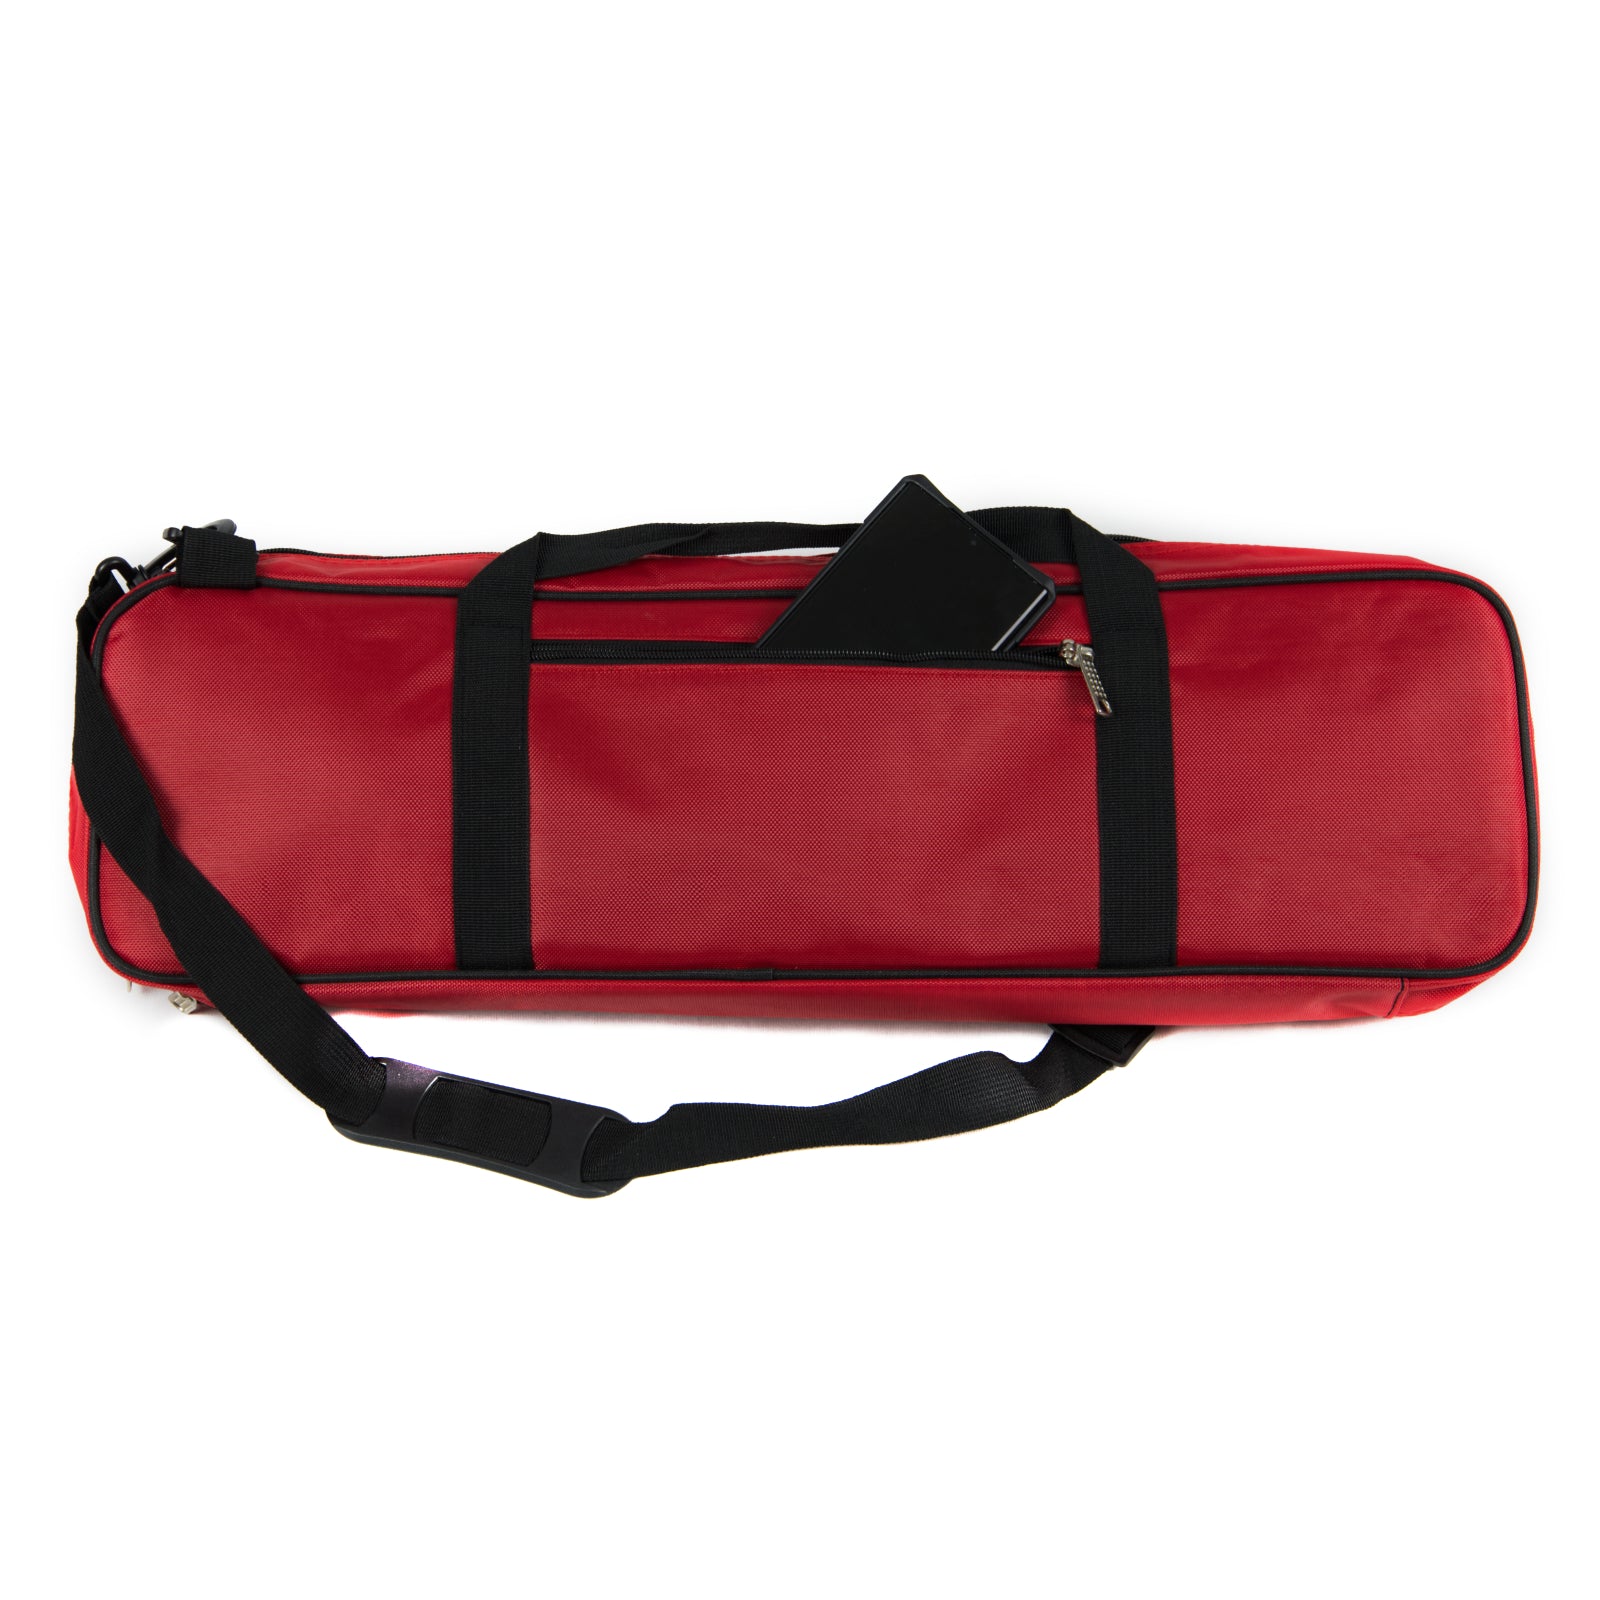 Deluxe Carry All Chess Bag - Red